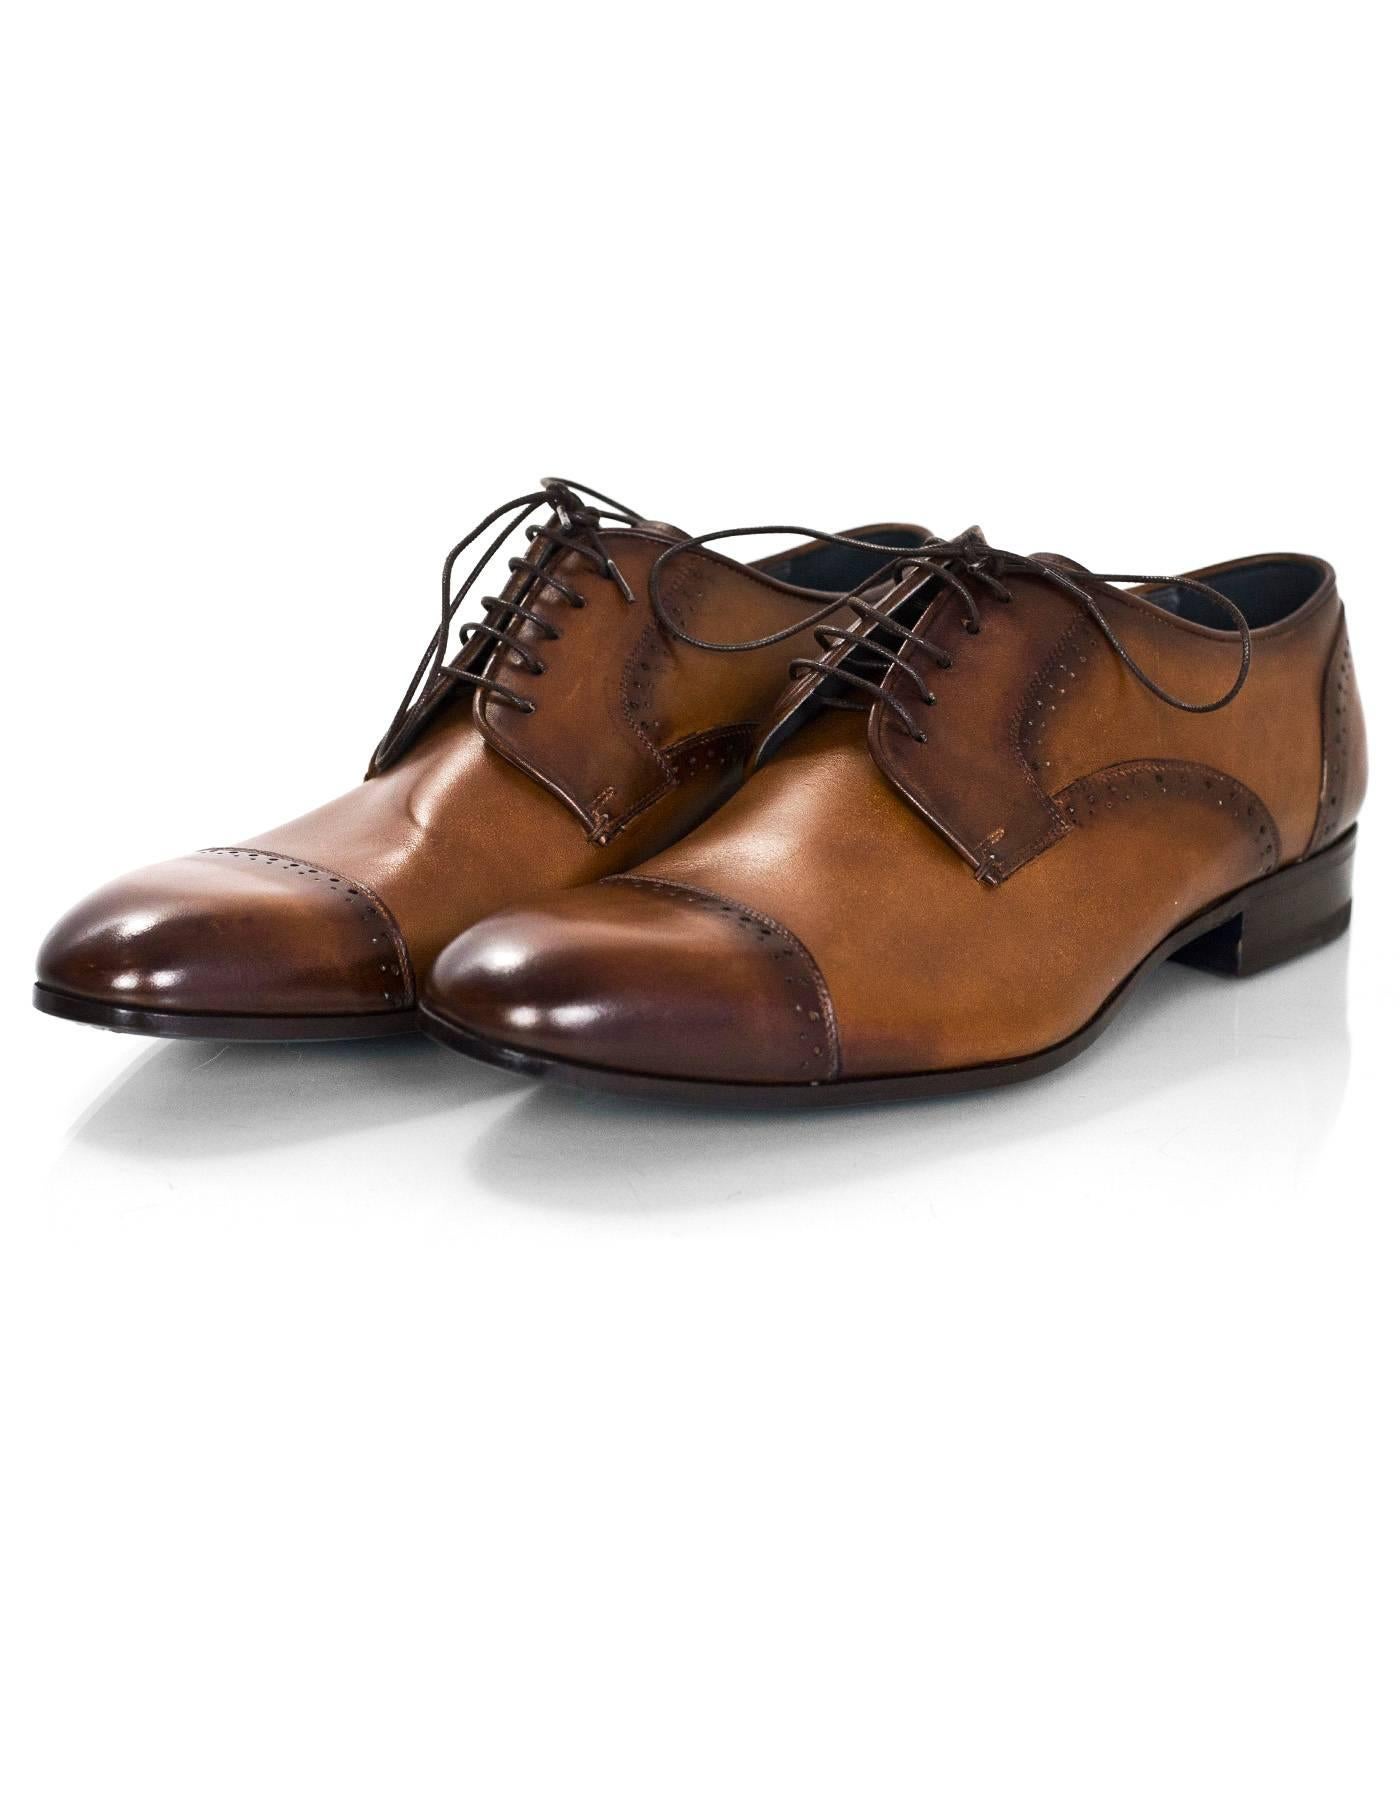 Lanvin Men's Brown Leather Oxford Shoes Sz 8 NIB

Made In: Italy
Color: Brown
Materials: Leather
Closure/Opening: Lace tie closure
Sole Stamp: Lanvin
Overall Condition: Excellent pre-owned condition
Included: Lanvin box, dust bags, extra